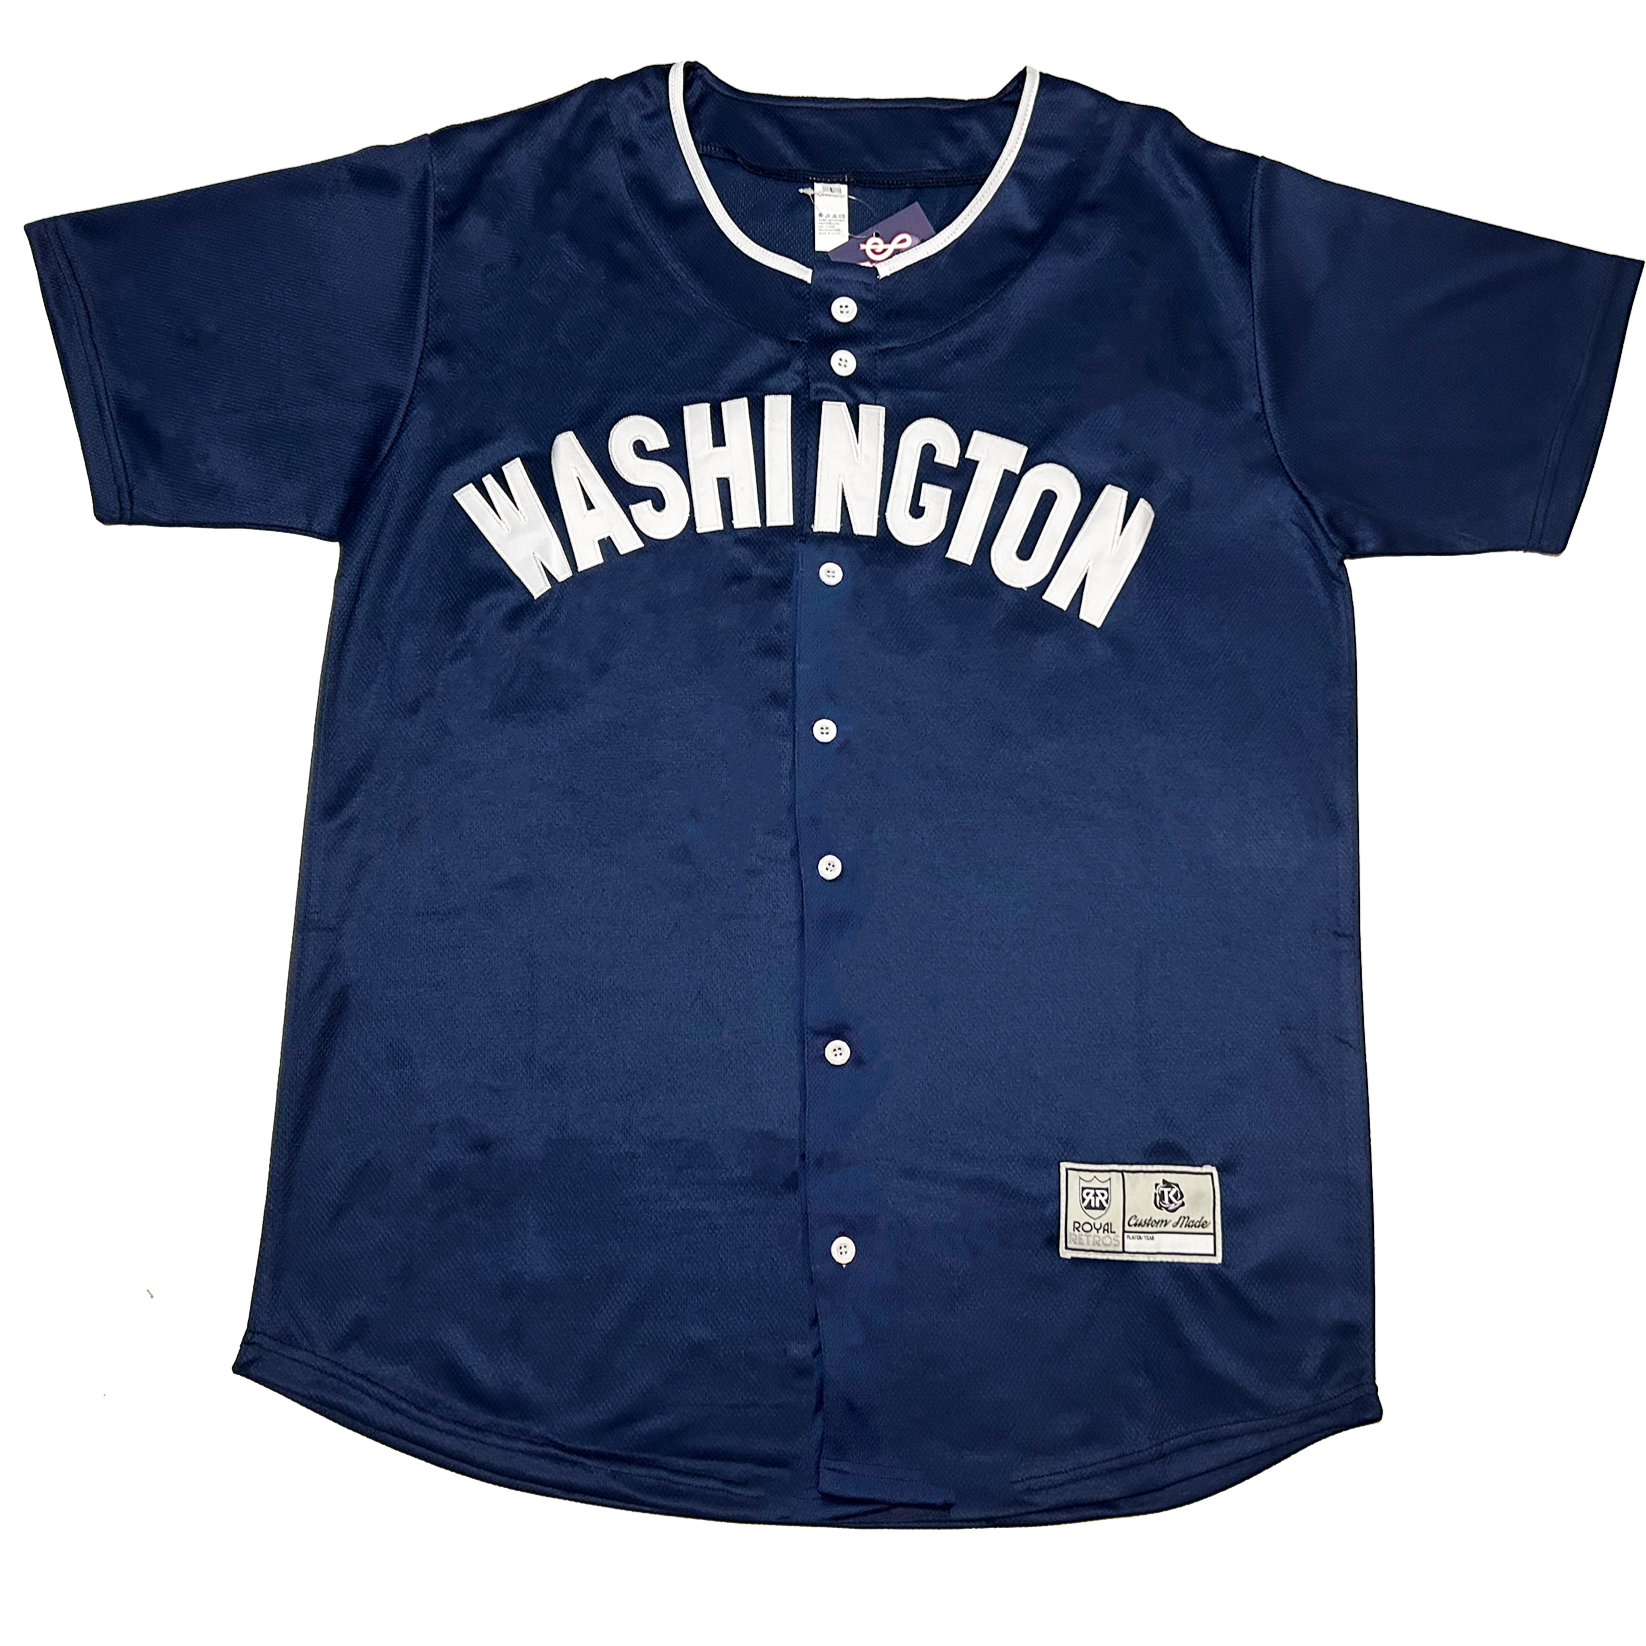  Custom Baseball Jersey, Printed Personalized Team Name Number  Logo, Navy White Pinstripe Red White Sports Uniform For Men Women Youth :  Handmade Products